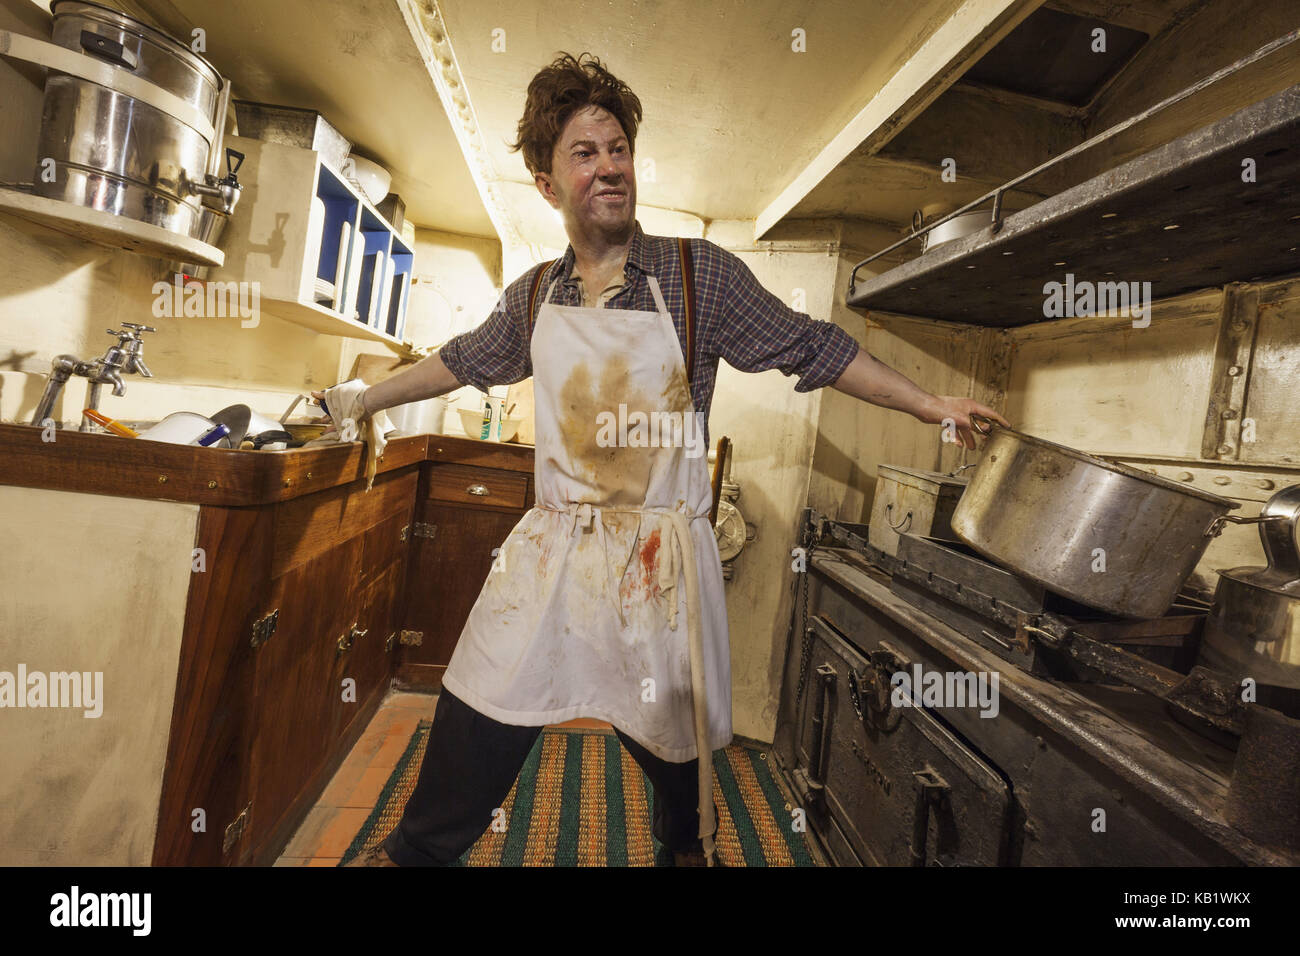 England, Lincolnshire, Grimbsy, national Fishing Heritage Centre museum, exhibit, fishing boat, galley, cook, Stock Photo